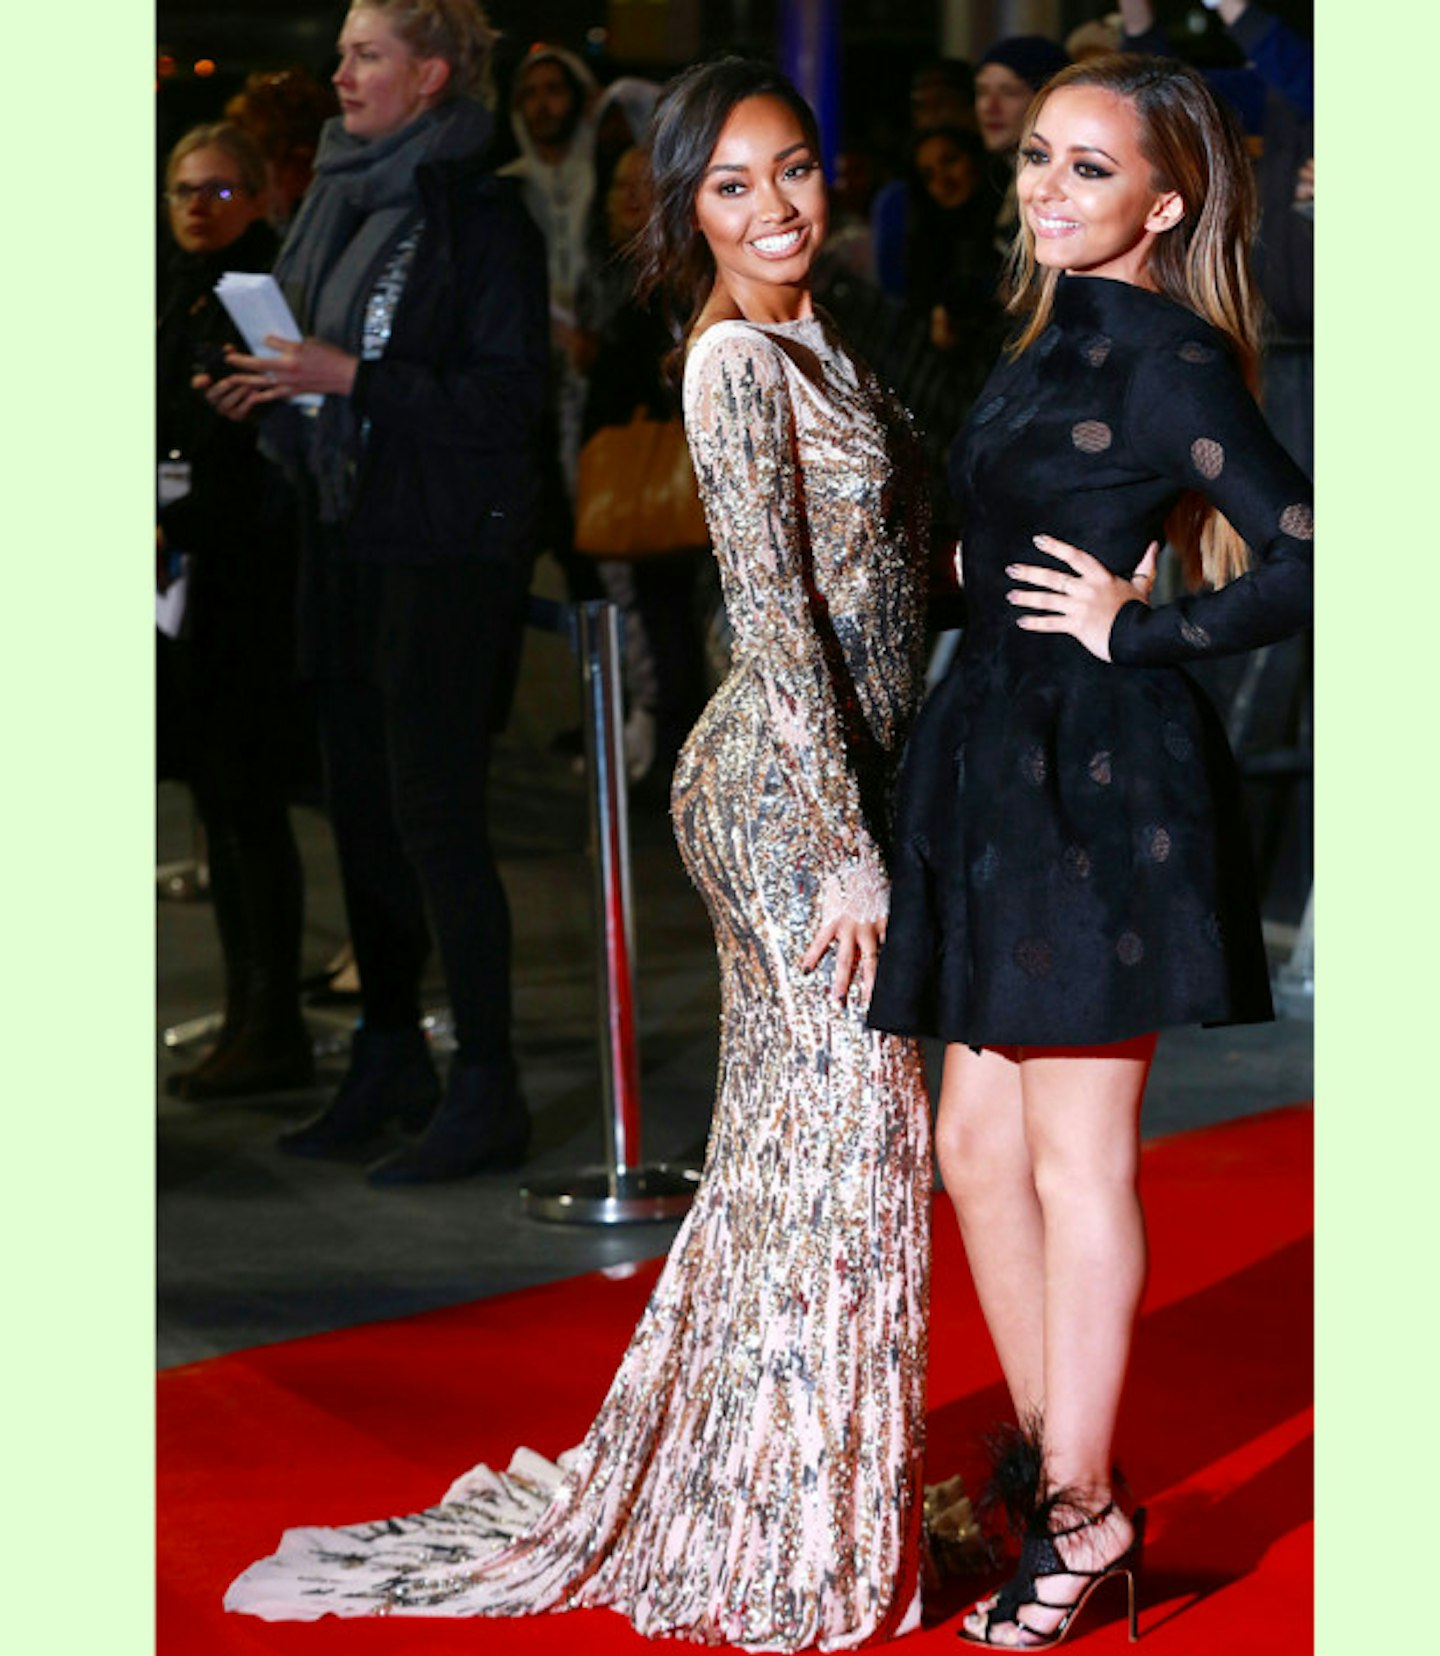 Little Mix's Leigh-Anne Pinnock and Jade Thirlwall